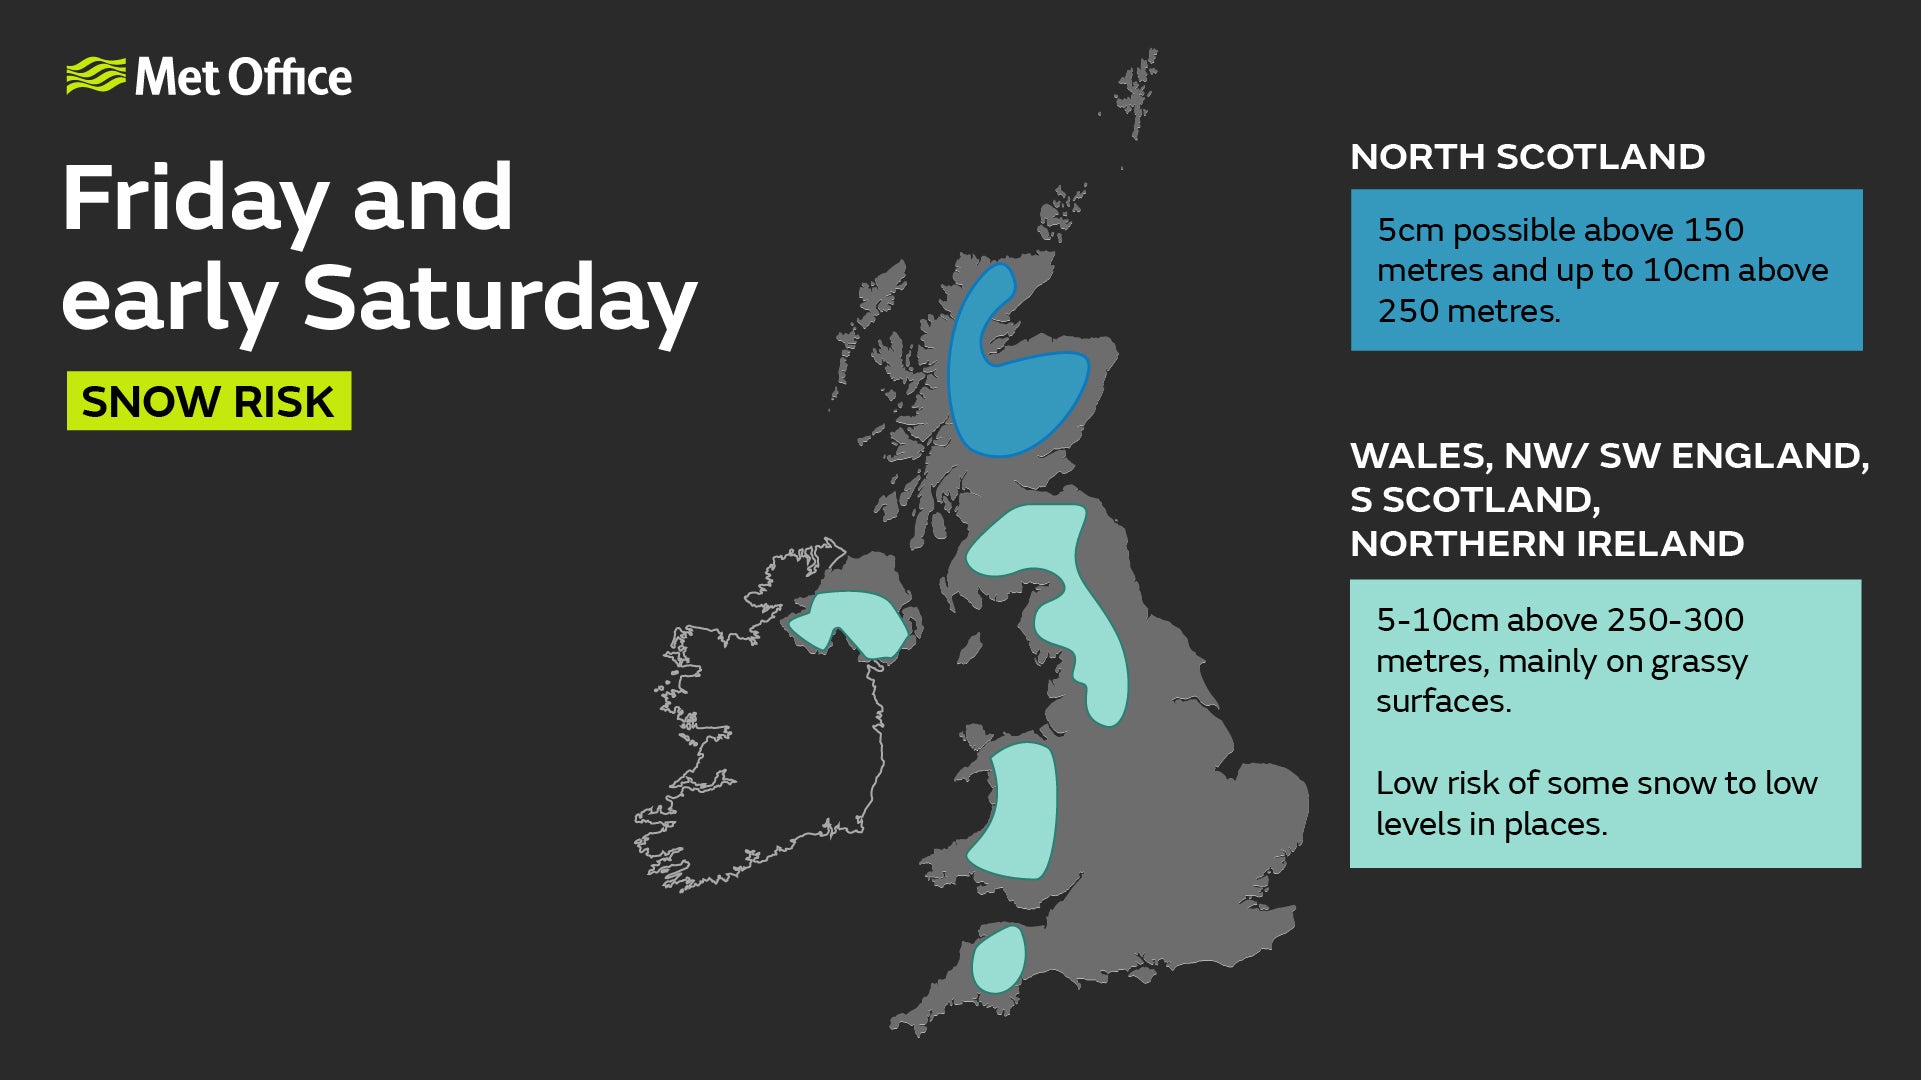 Met Office forecast for Friday shows more snow falling on higher grounds, with up to 10cm expected in hilly regions